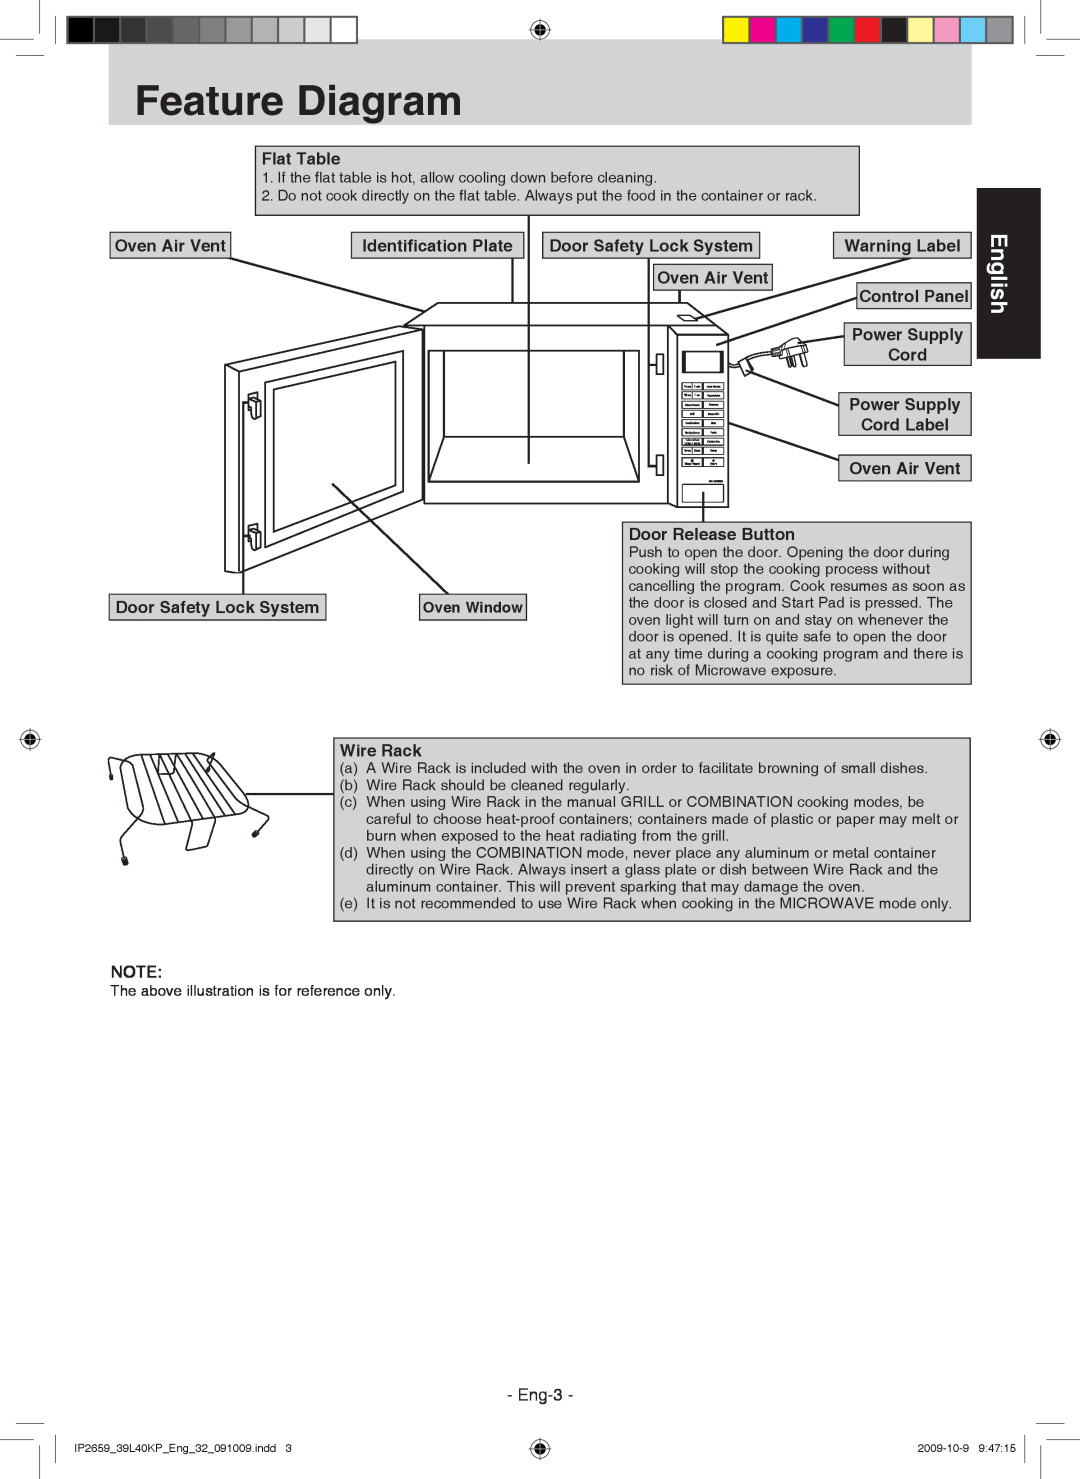 Panasonic NN-GF569M Feature Diagram, English, Oven Air Vent, Flat Table, Identiﬁcation Plate, Door Safety Lock System 